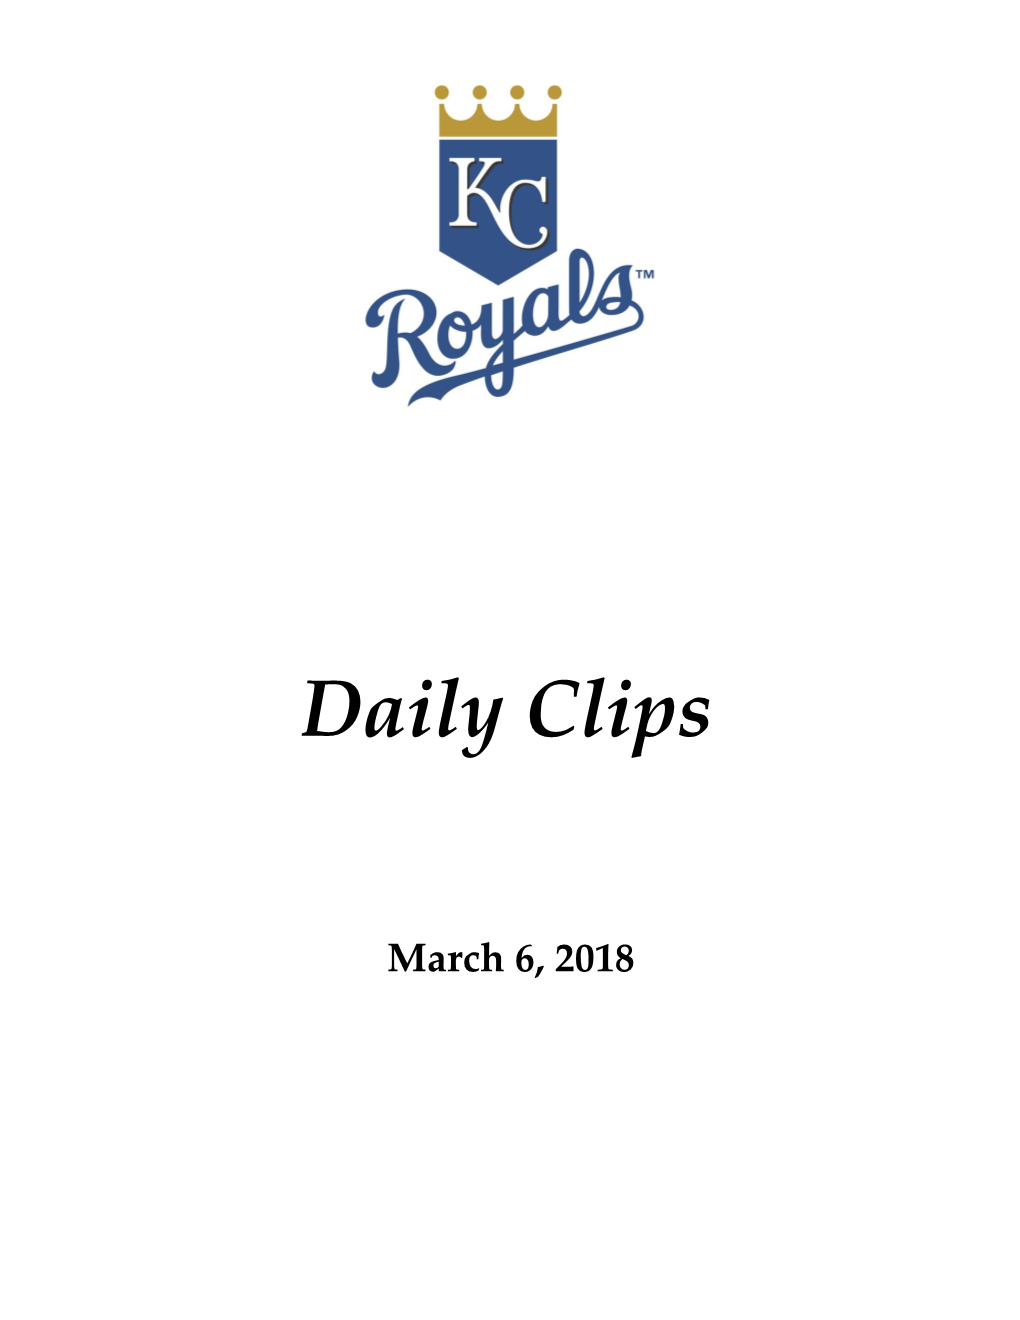 Inbox: How Will Royals' Roster Shake Out?